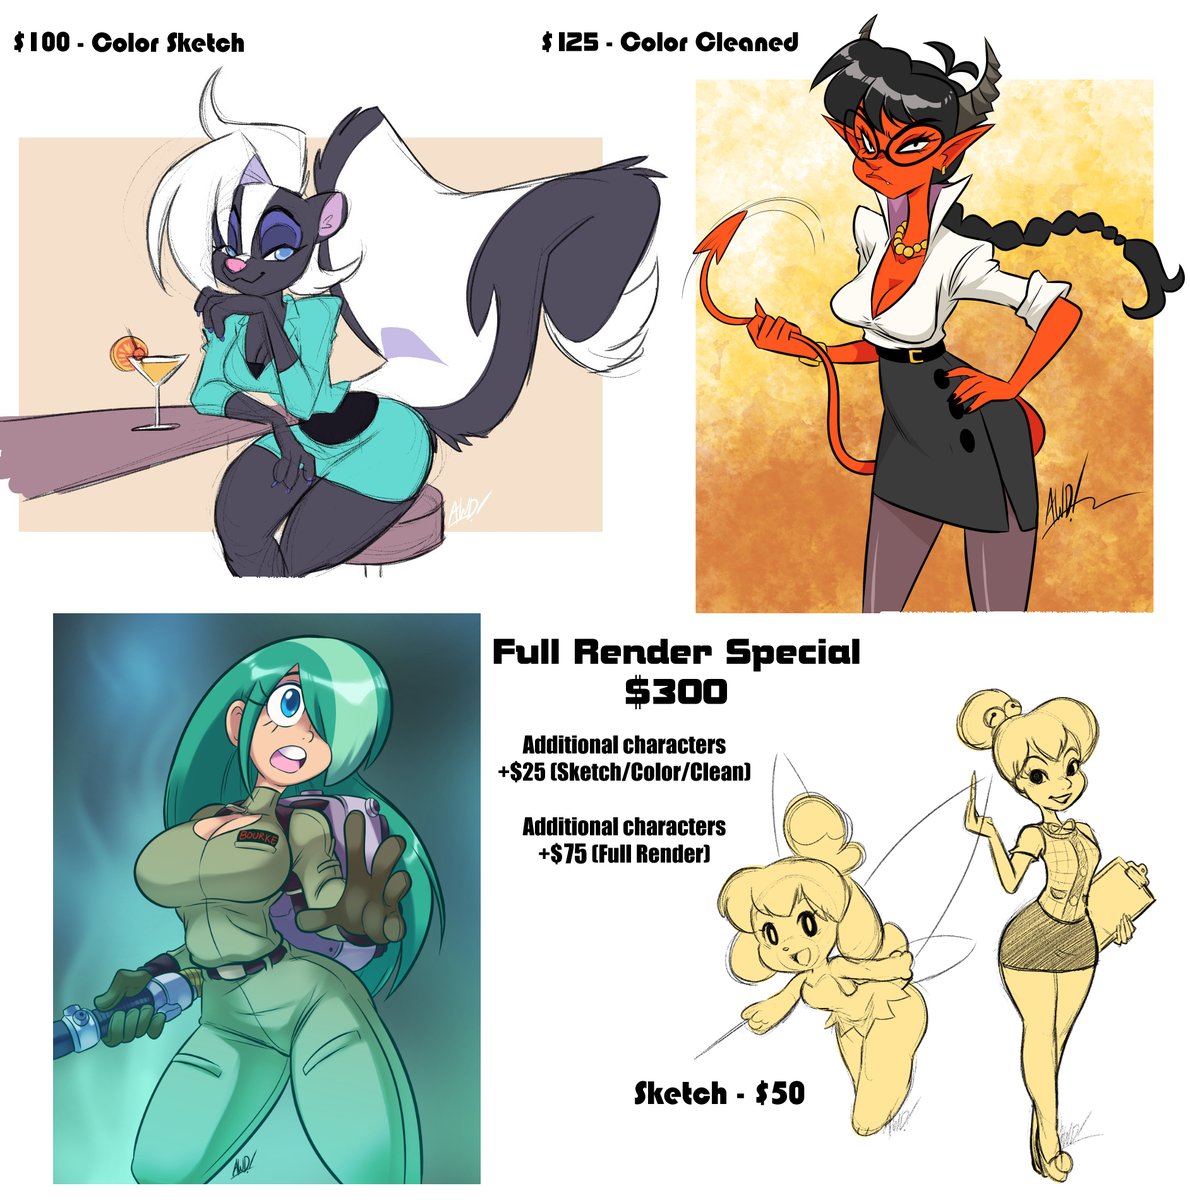 I need to make up for some expenses so I'm opening up some spots for commissions. Please apply if interested, thank you
https://t.co/sbXFonAWL1 